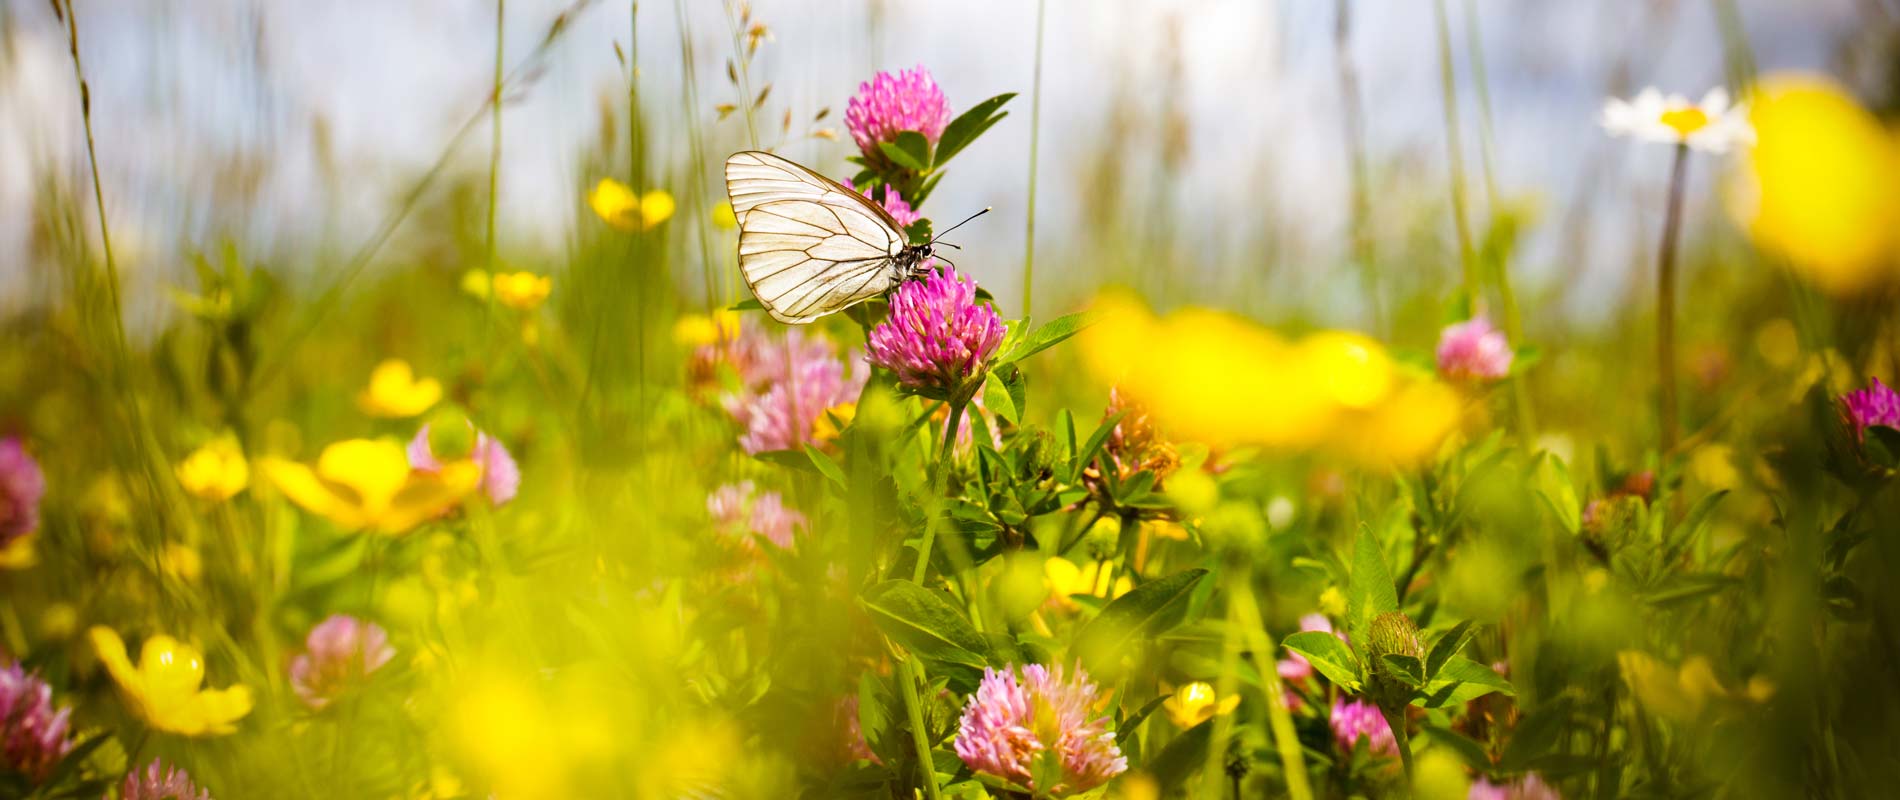 Butterfly perched upon a pink wild flower and fronds